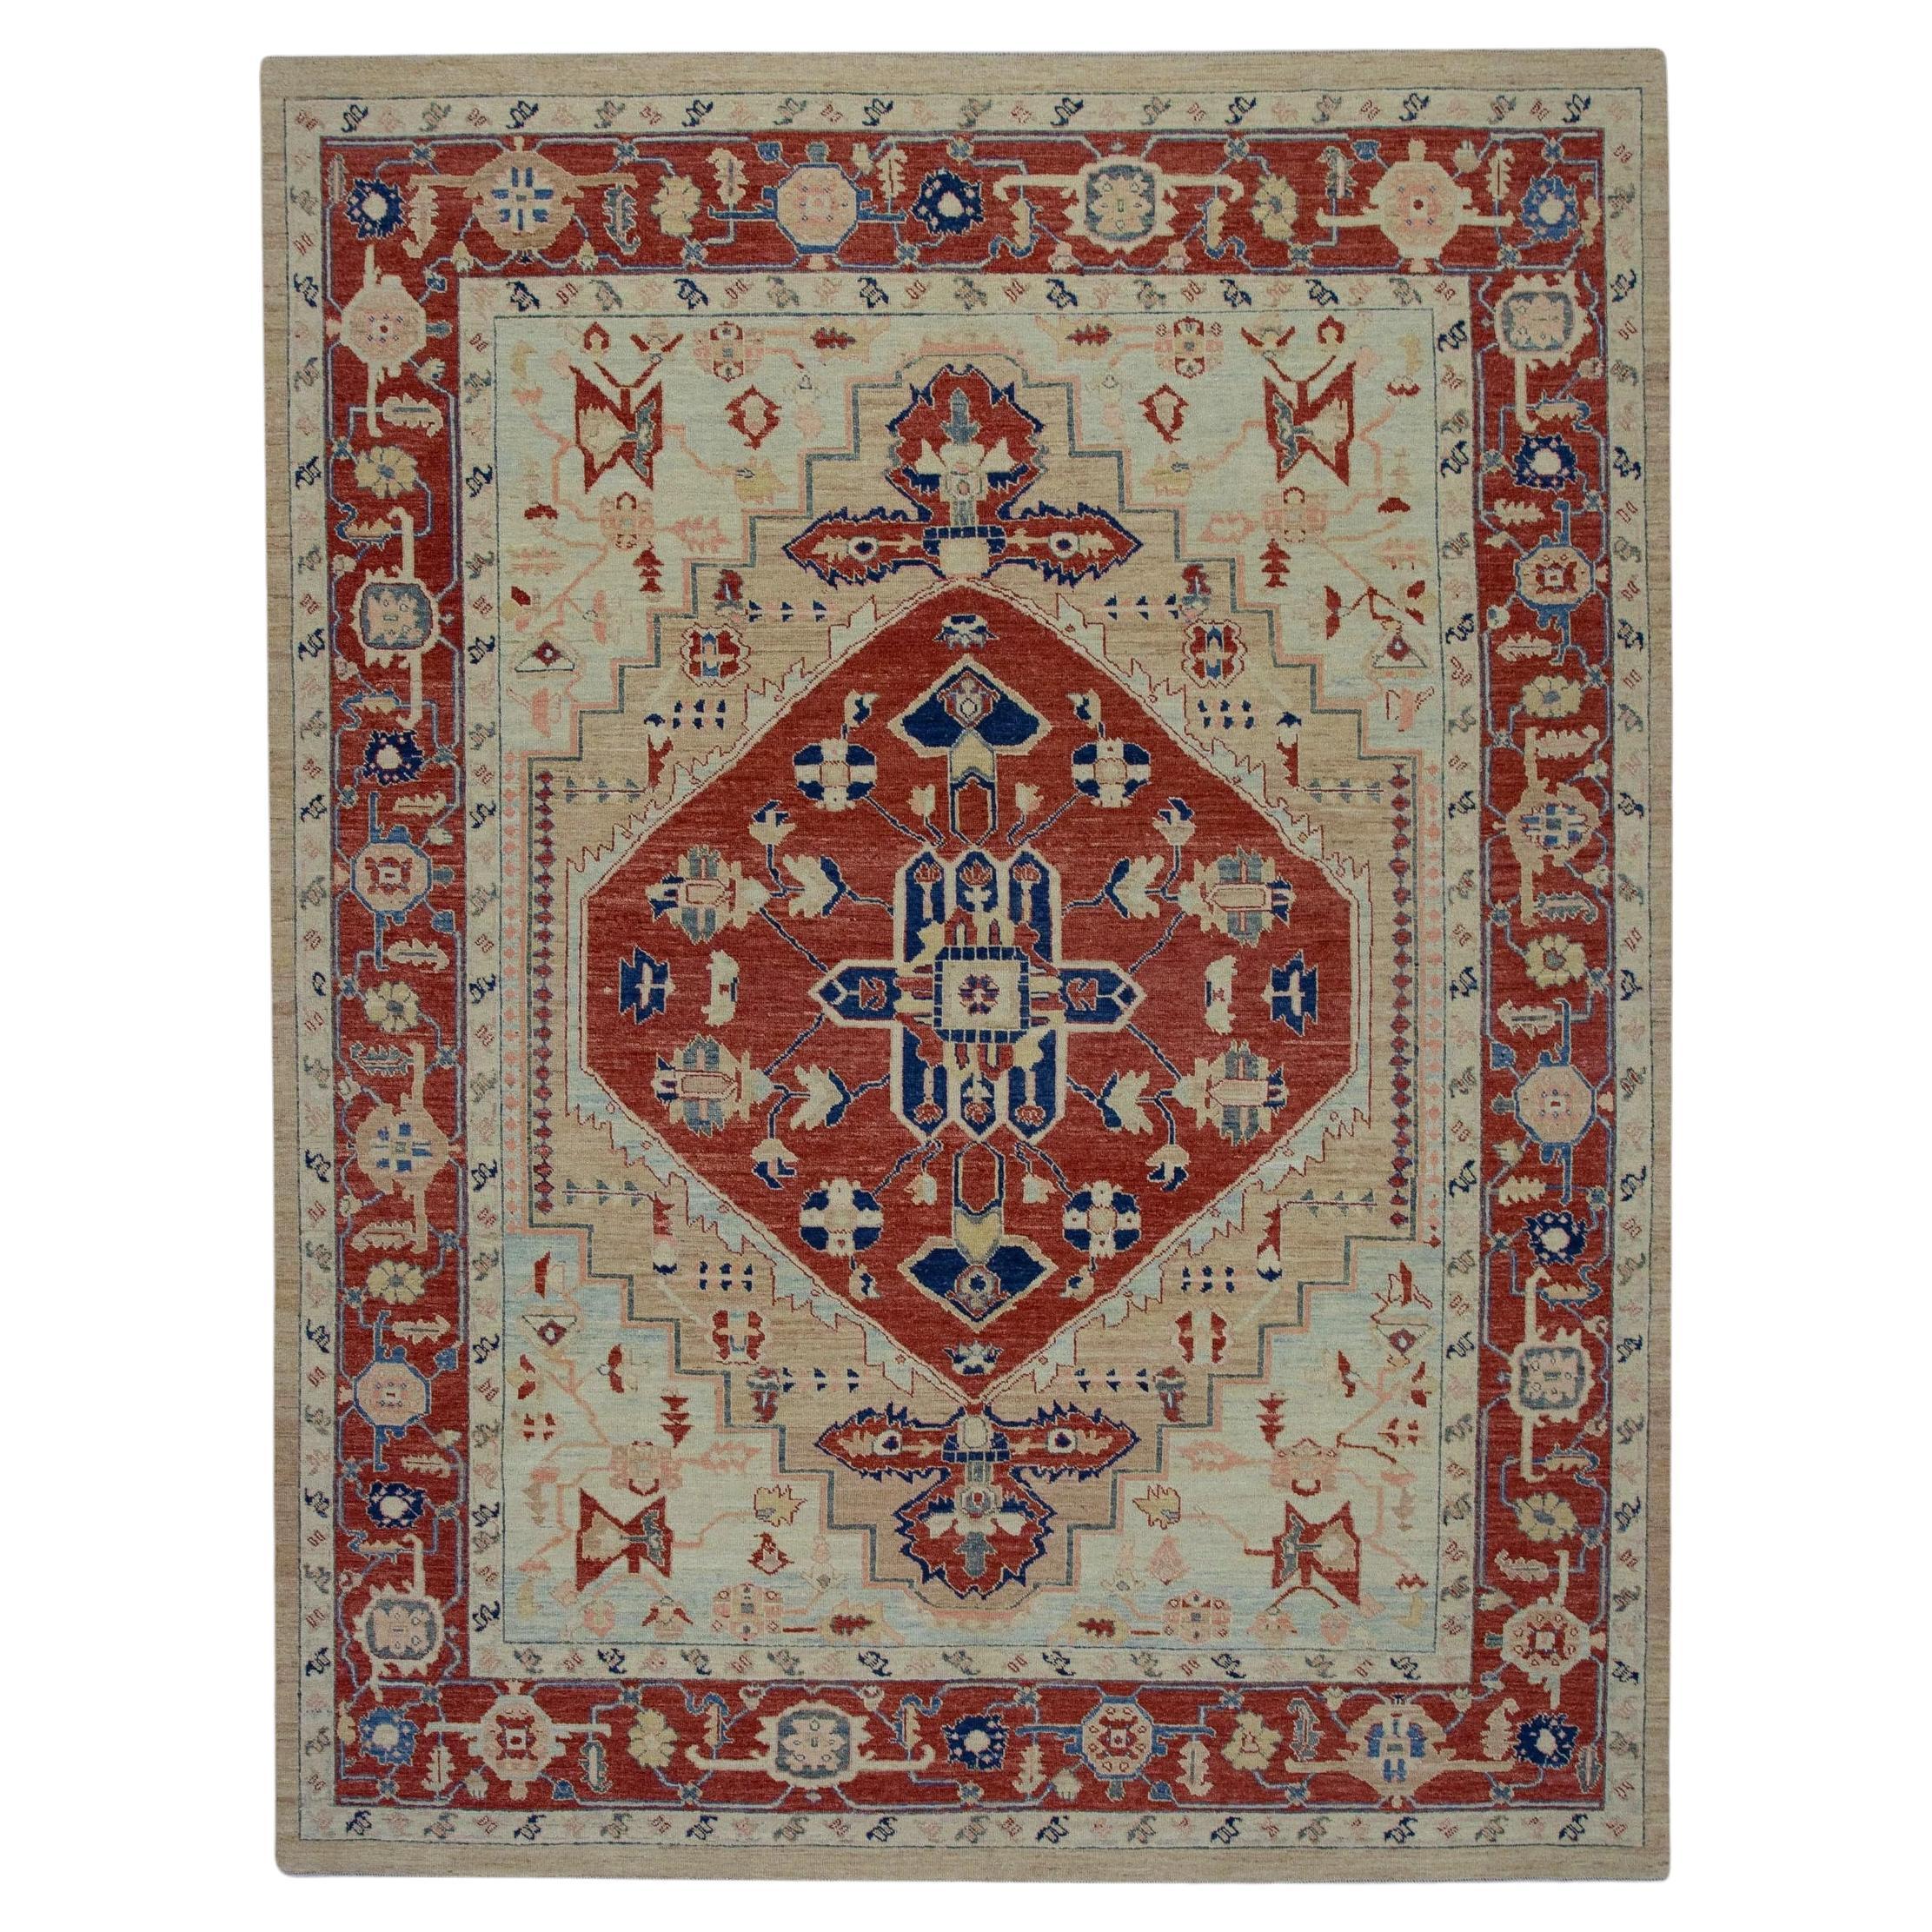 Floral Turkish Finewoven Wool Oushak Rug in Bright Red and Blue 7'10" x 10'